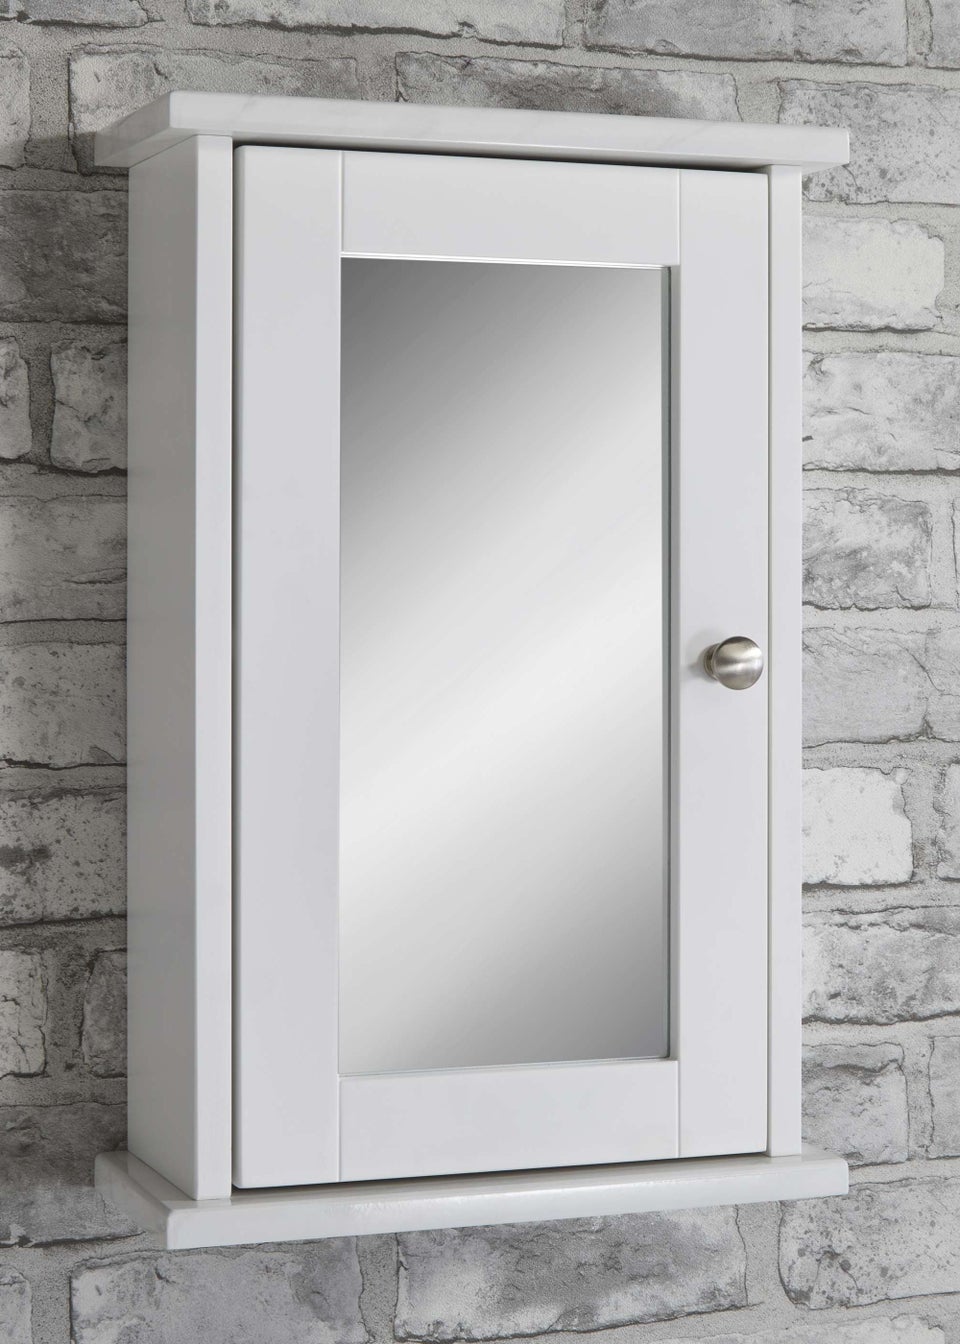 Lloyd Pascal Marble Effect Top Single Mirror Cabinet